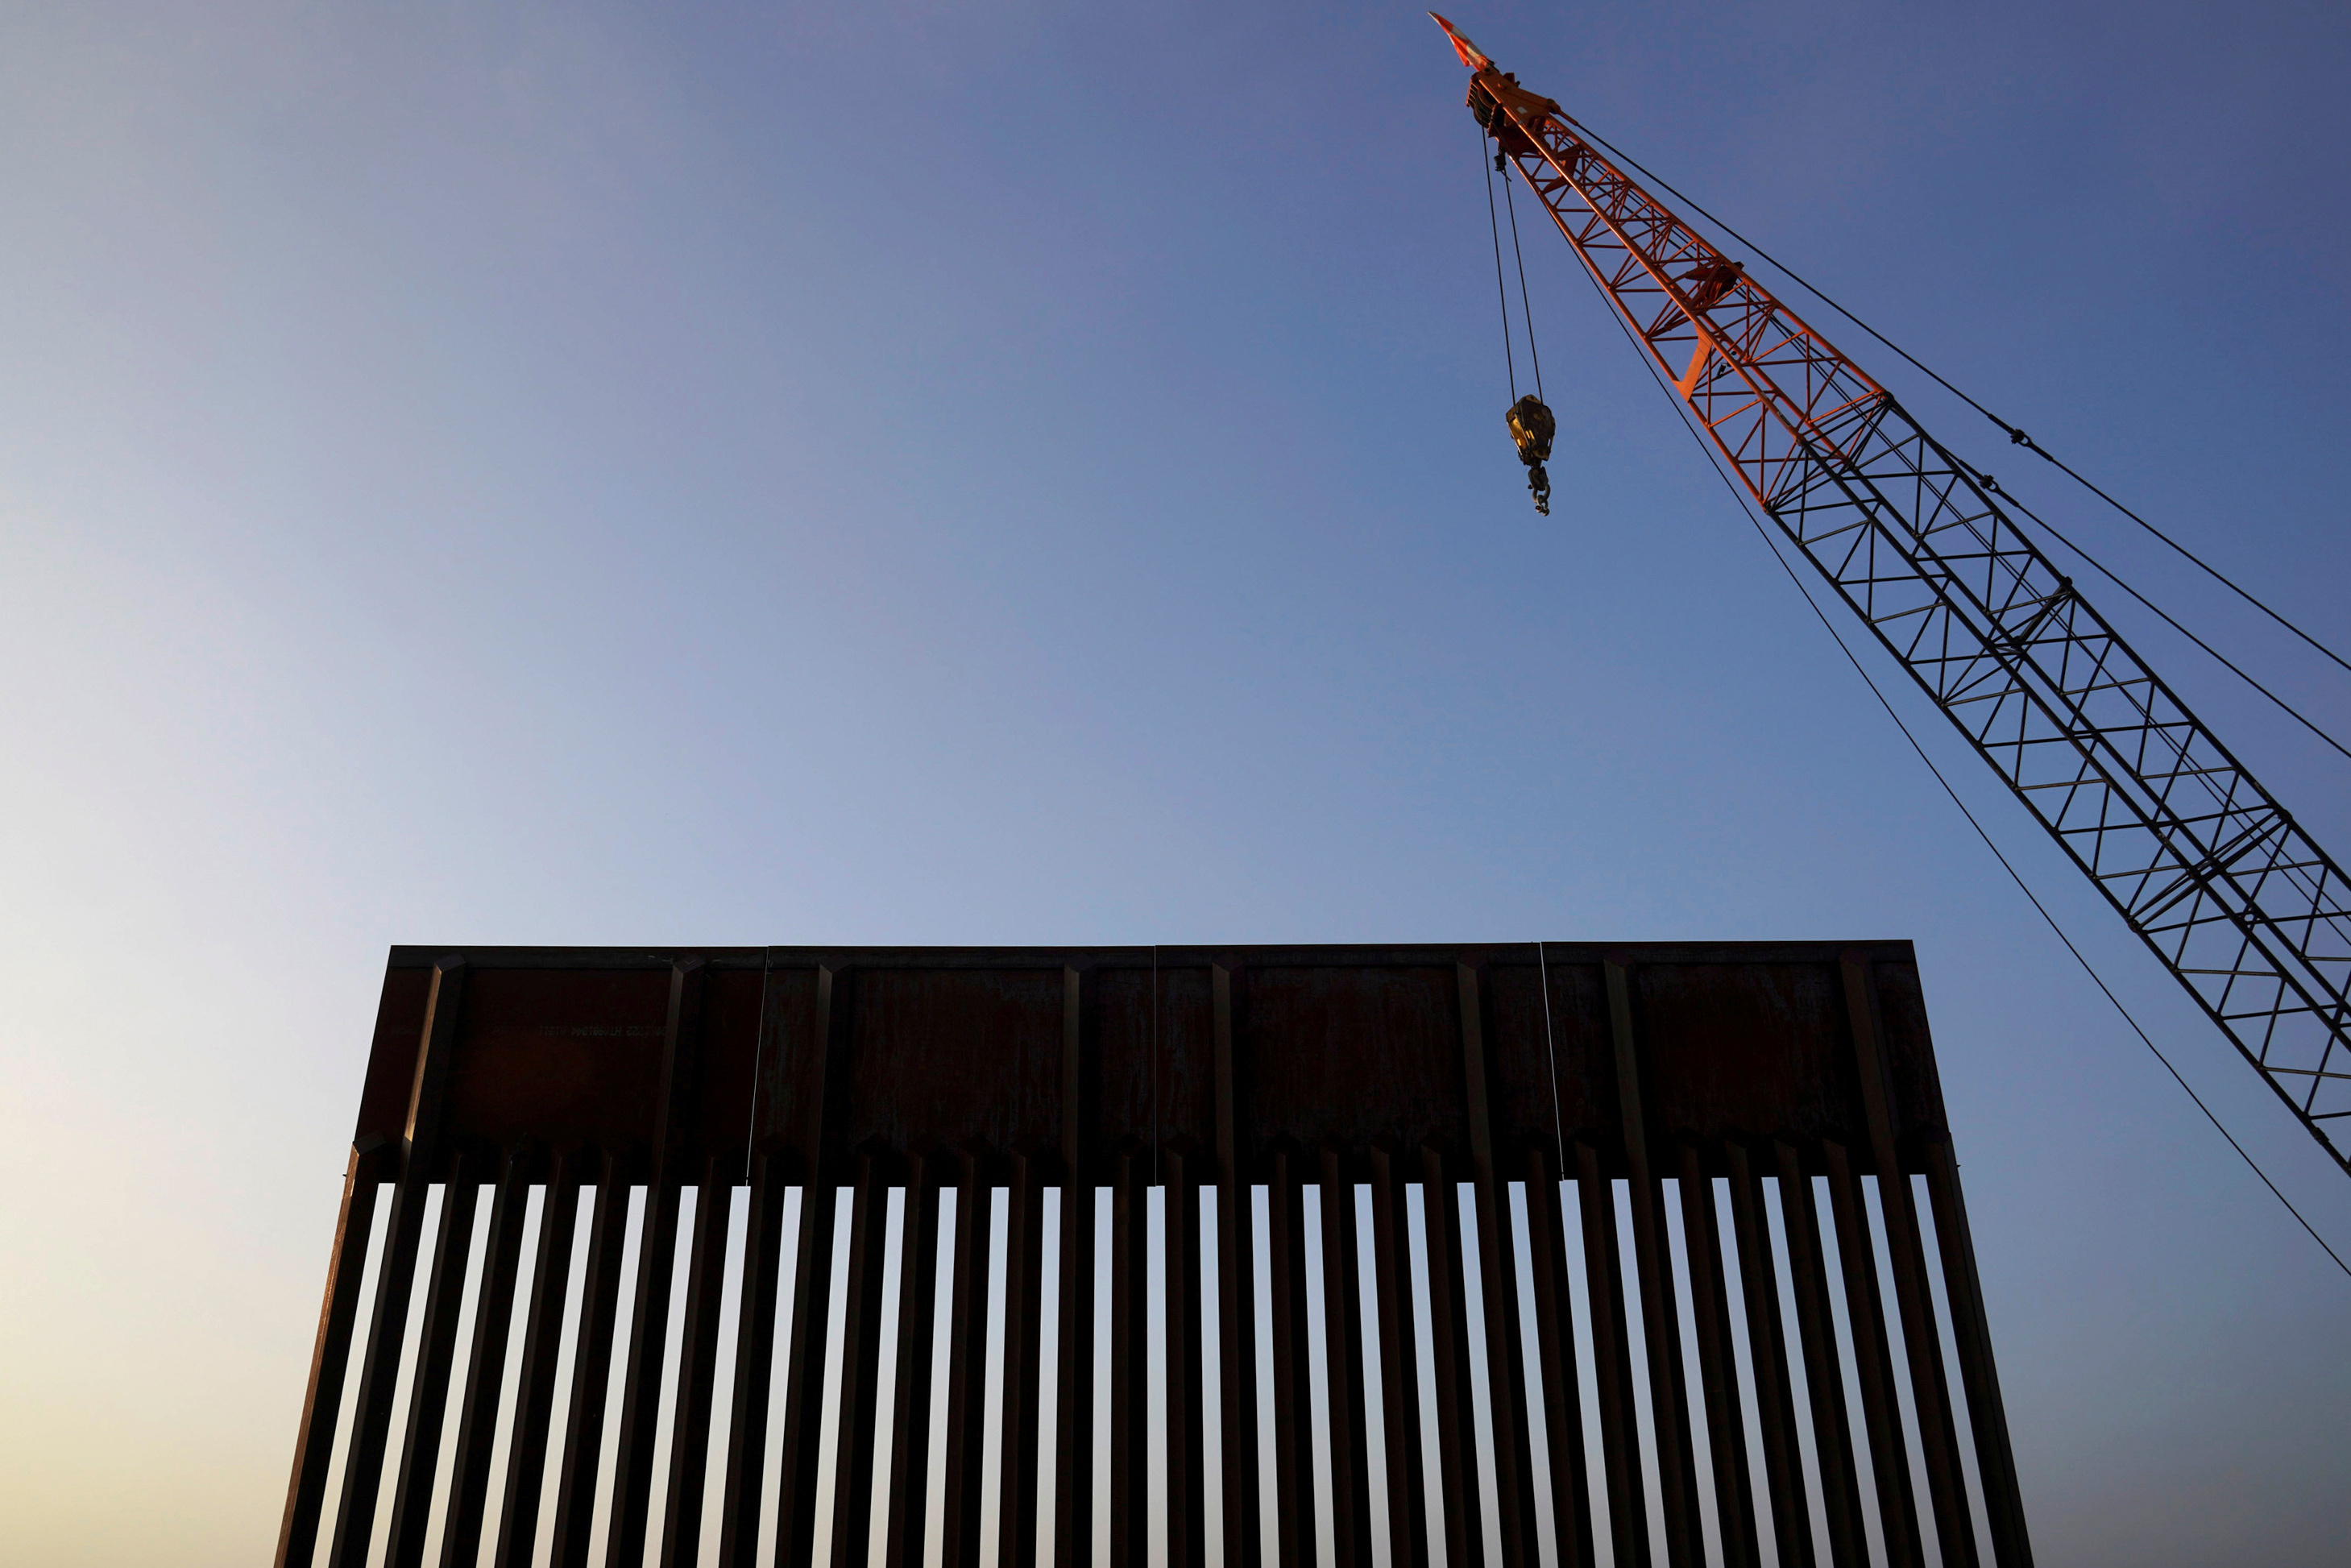 The construction of the wall consumes a large amount of water, image via Reuters